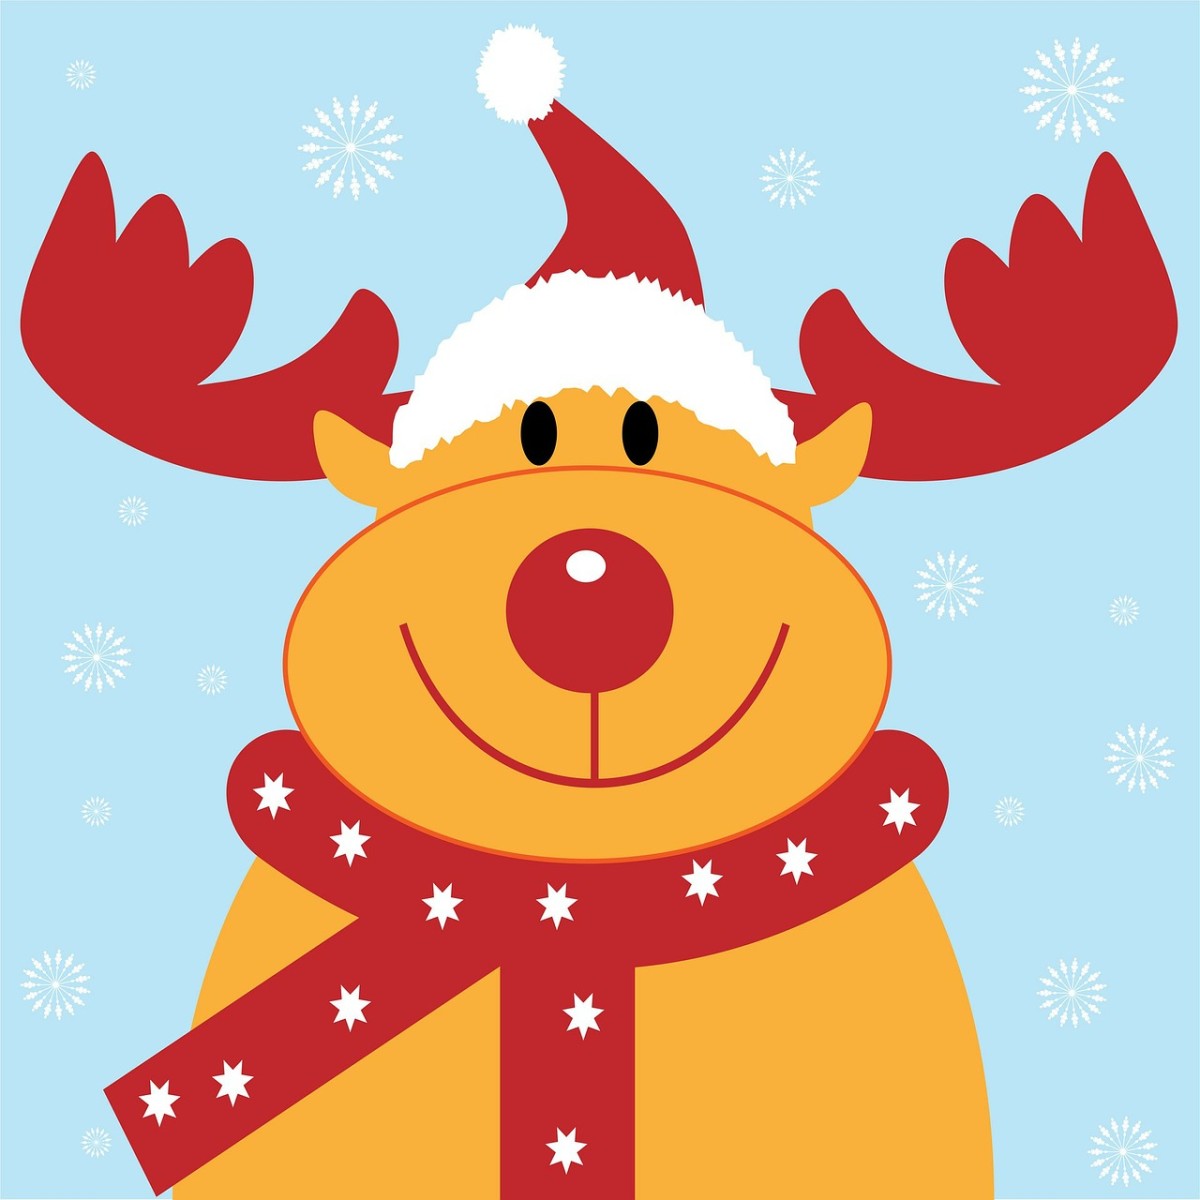 The Origin of Rudolph the Red-Nosed Reindeer and Relationship to Montgomery Ward